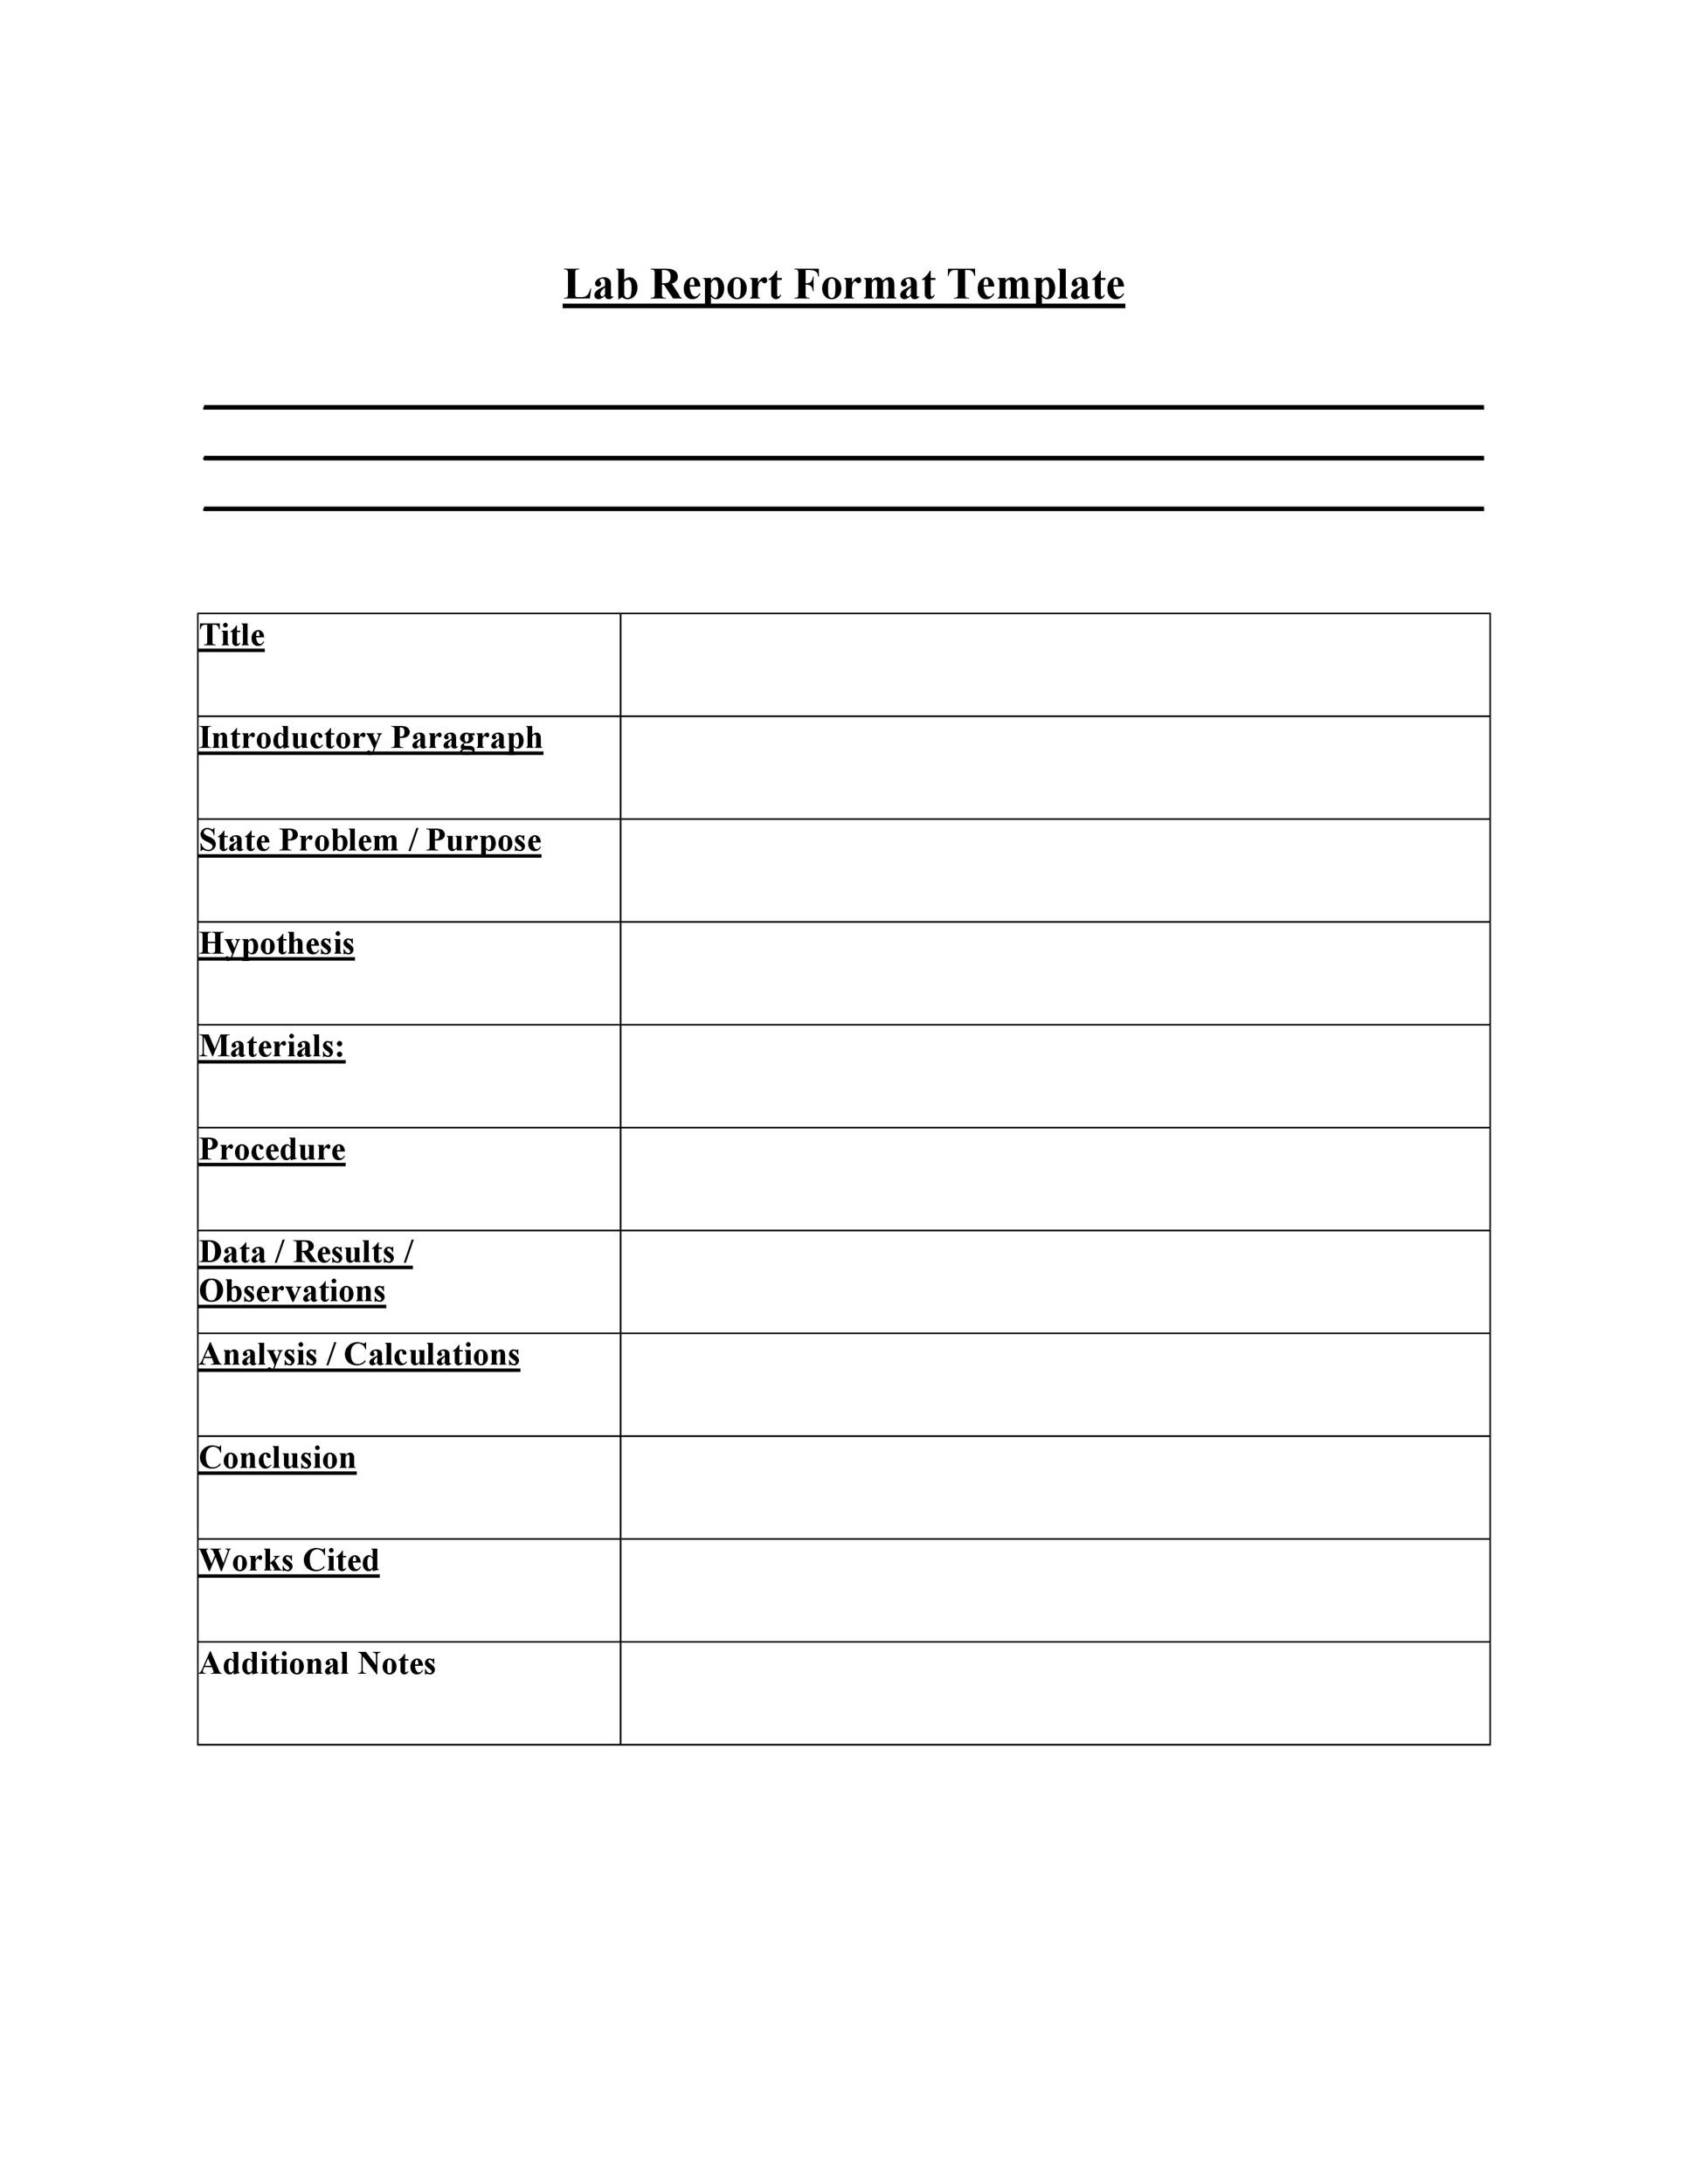 Free lab report template 05